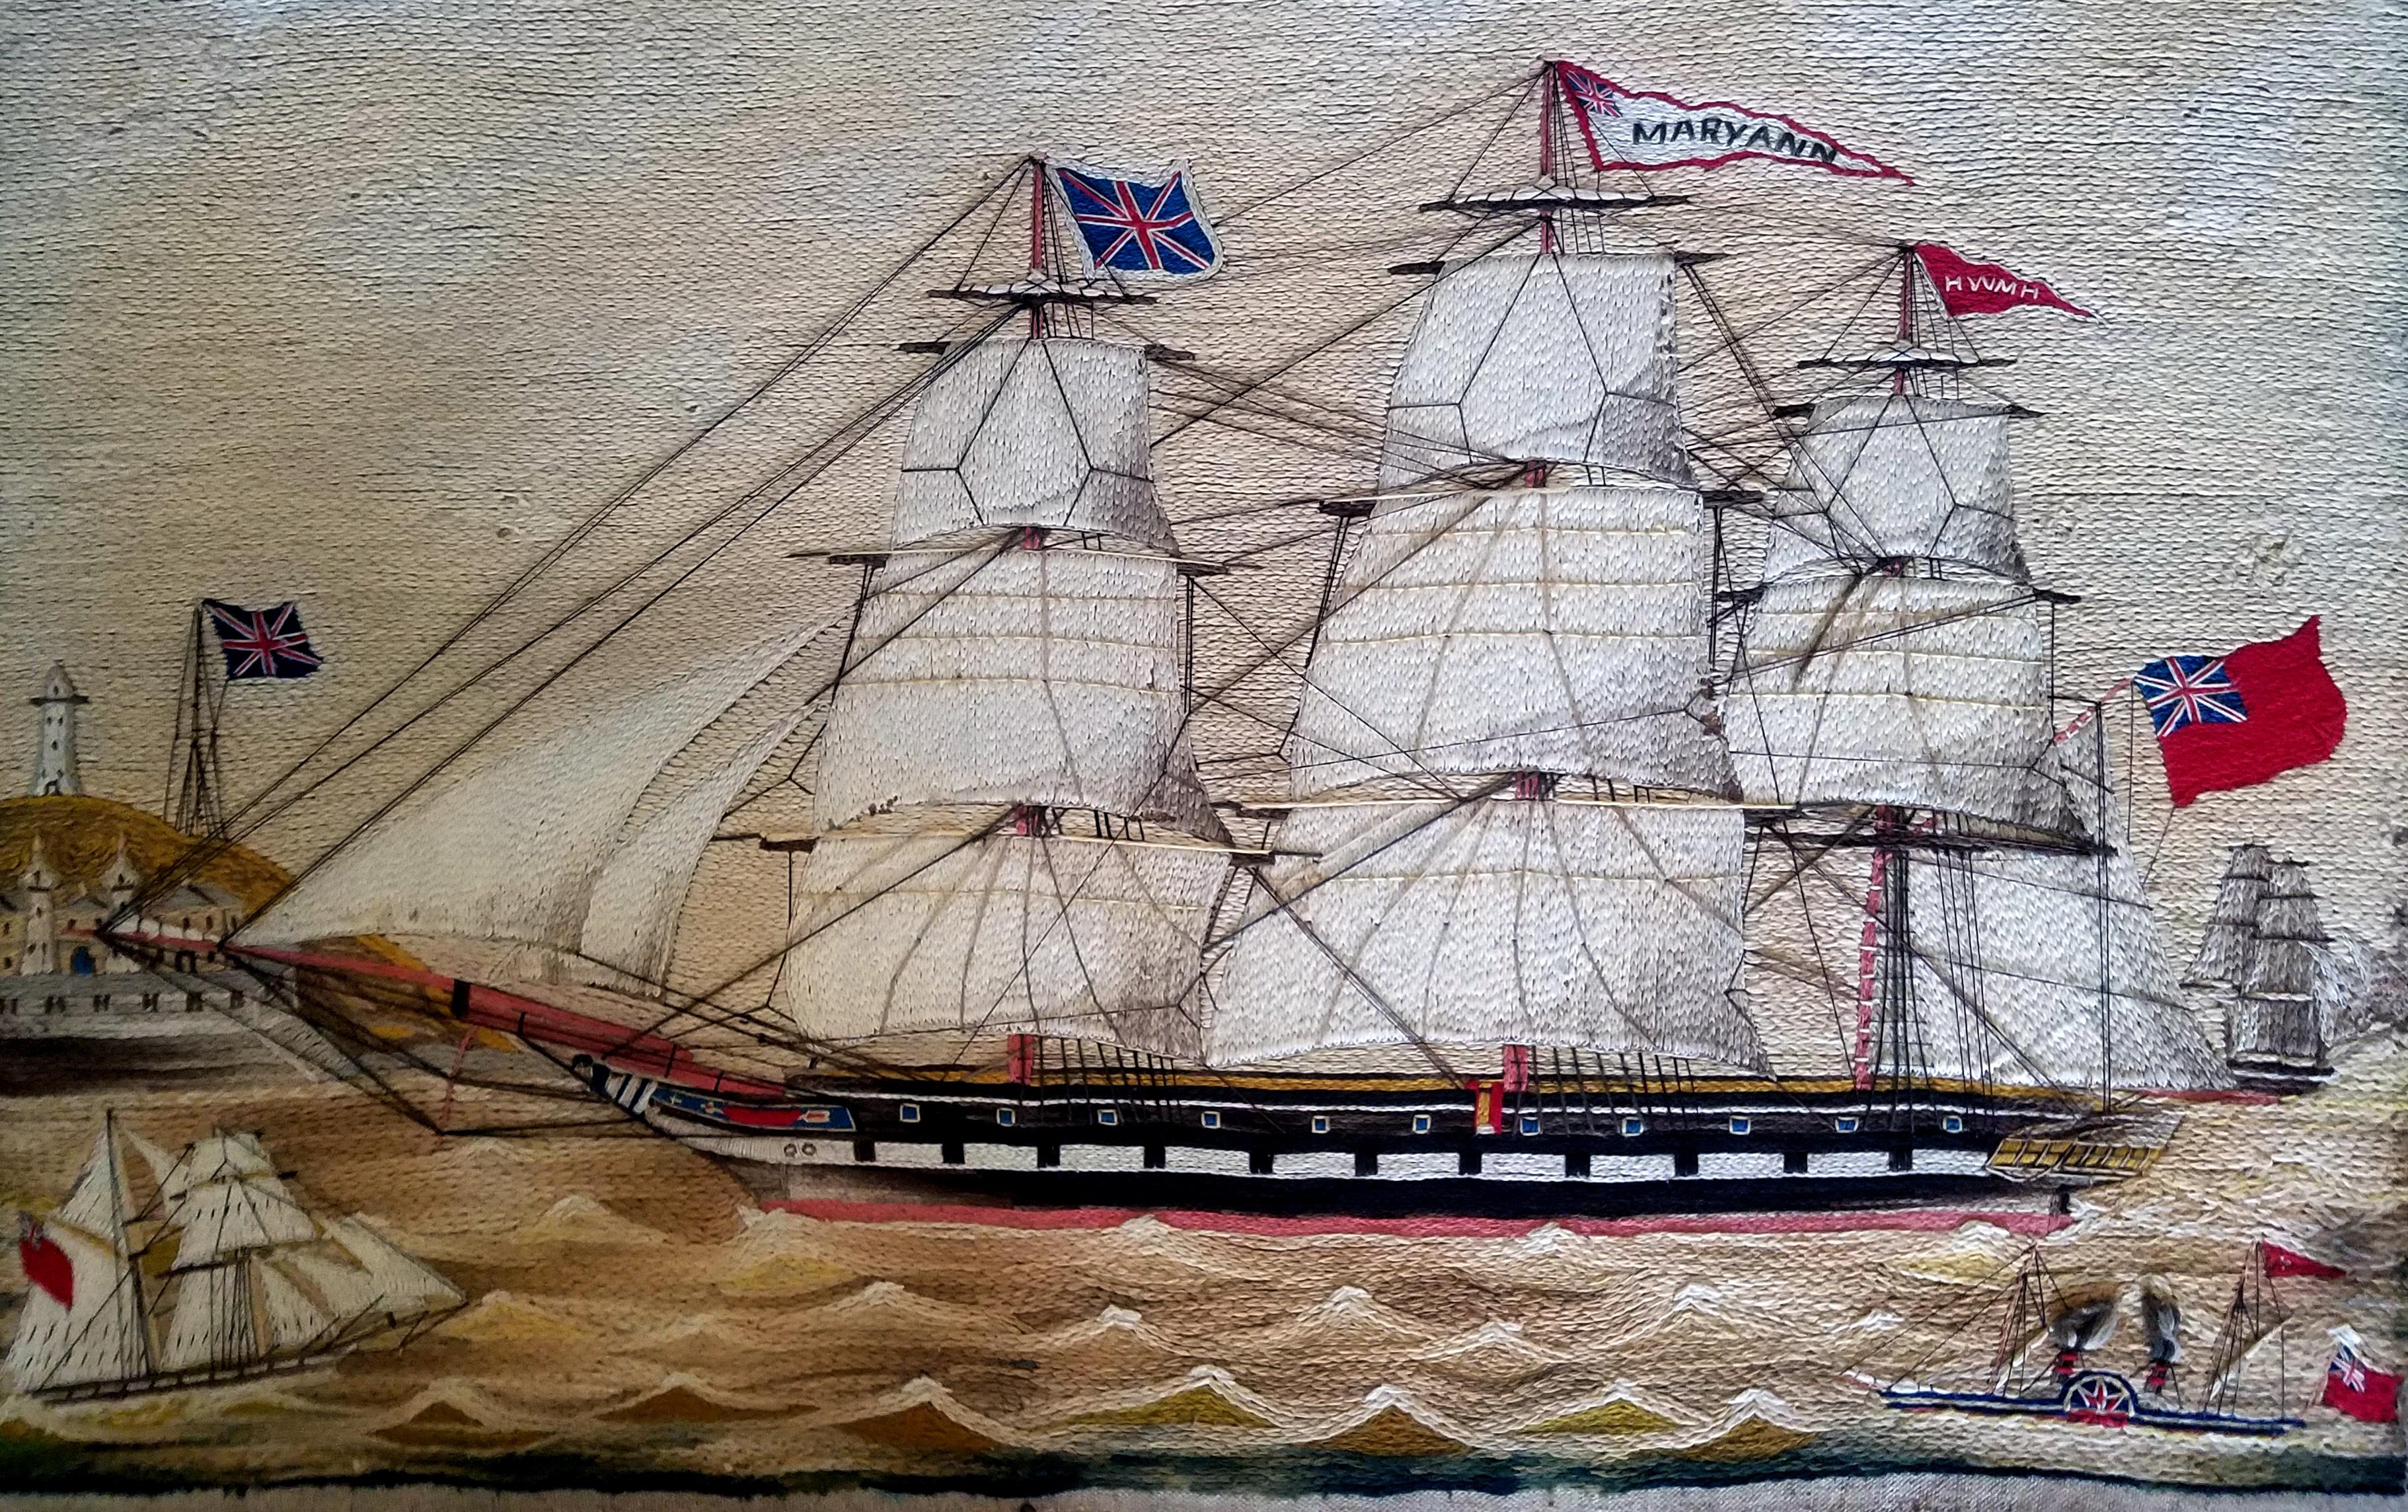 English British Sailor's Woolwork 'Woolie' of the Mary Ann, circa 1870-1880